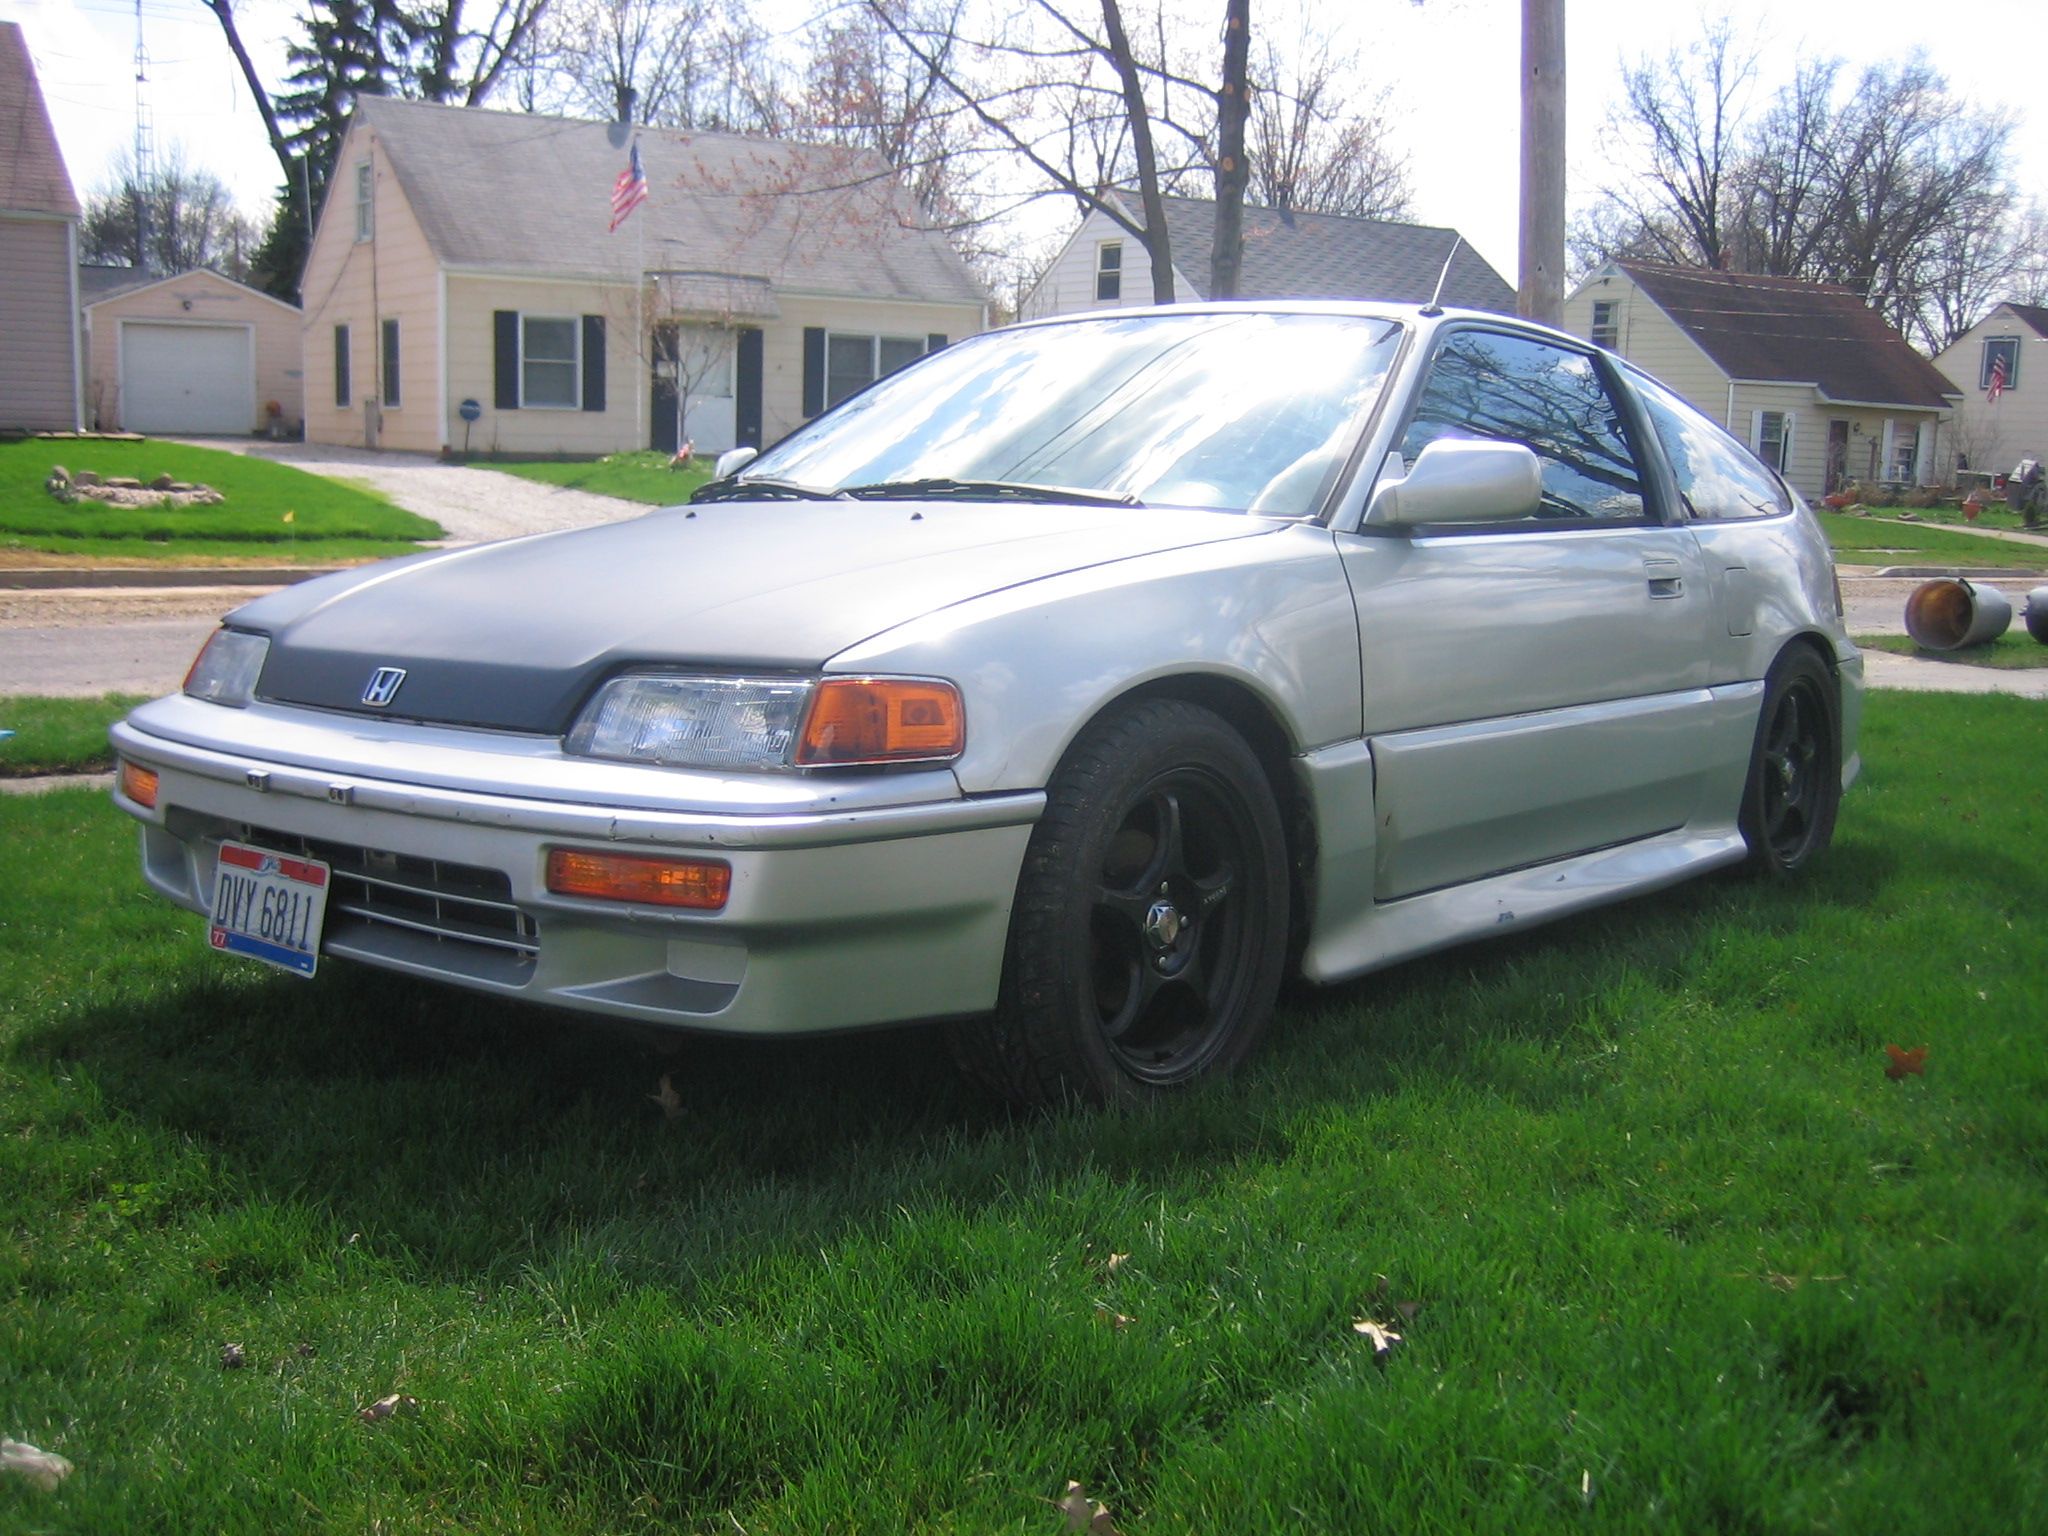 b16a crx.. will be missed!